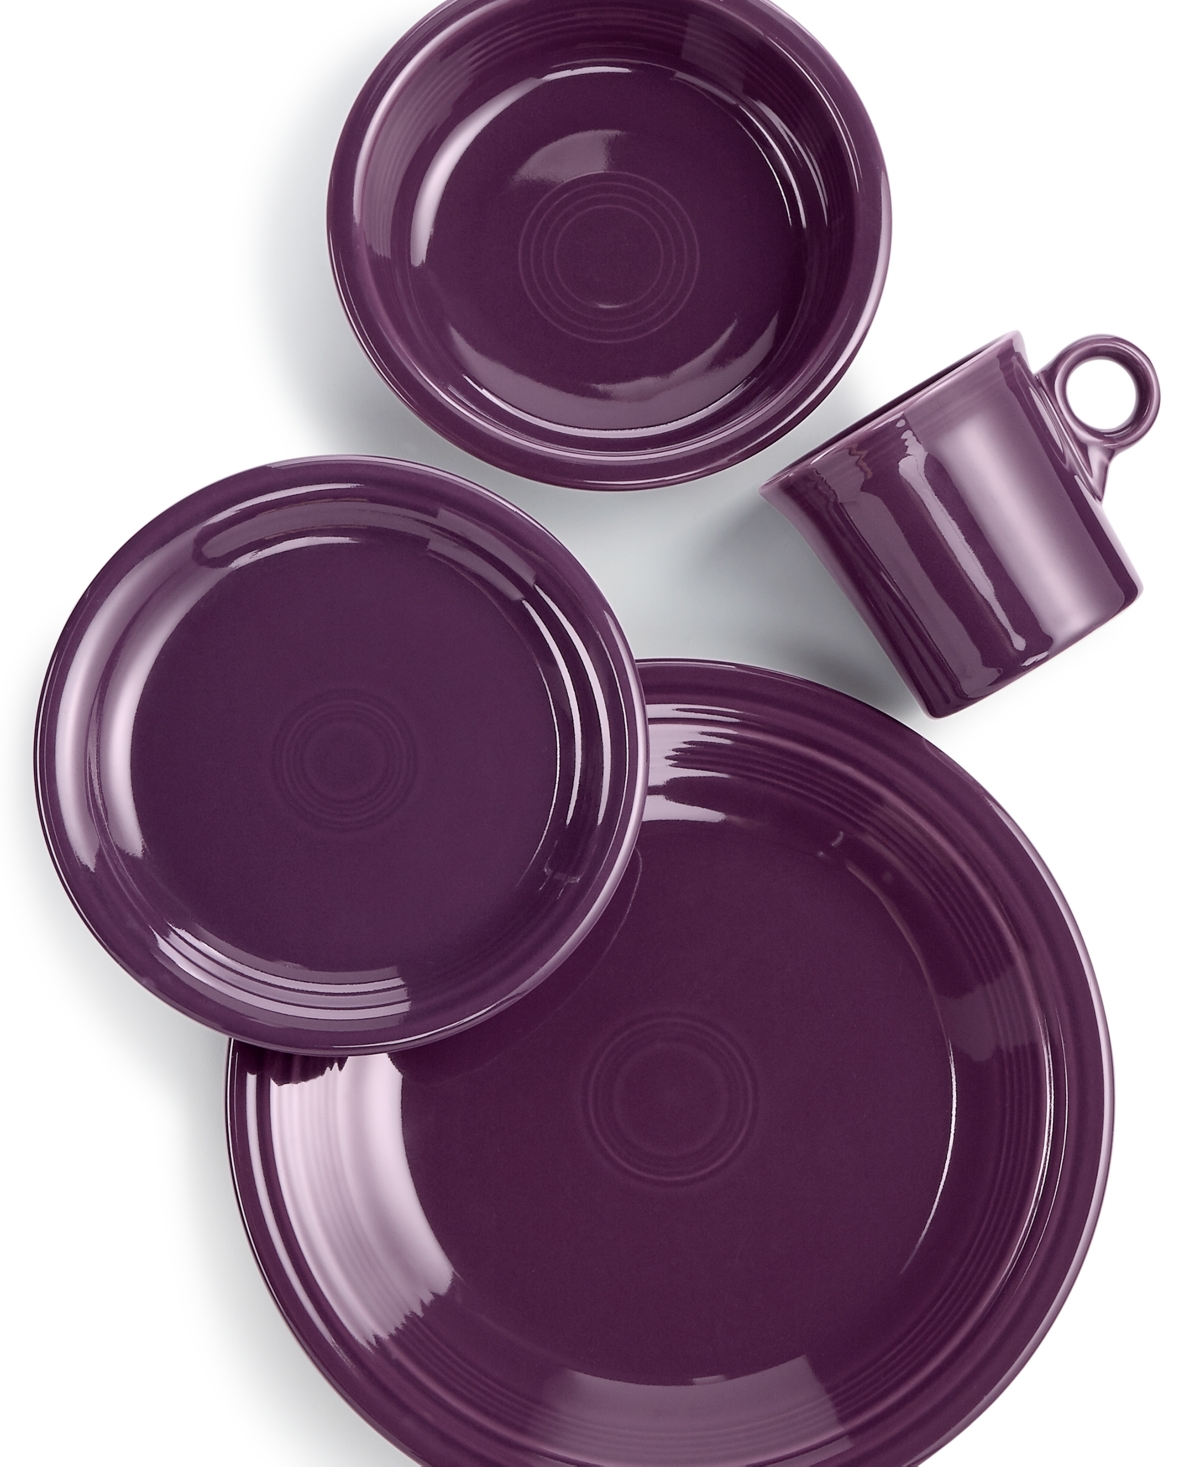 Fiesta 4-piece Place Setting In Mulberry